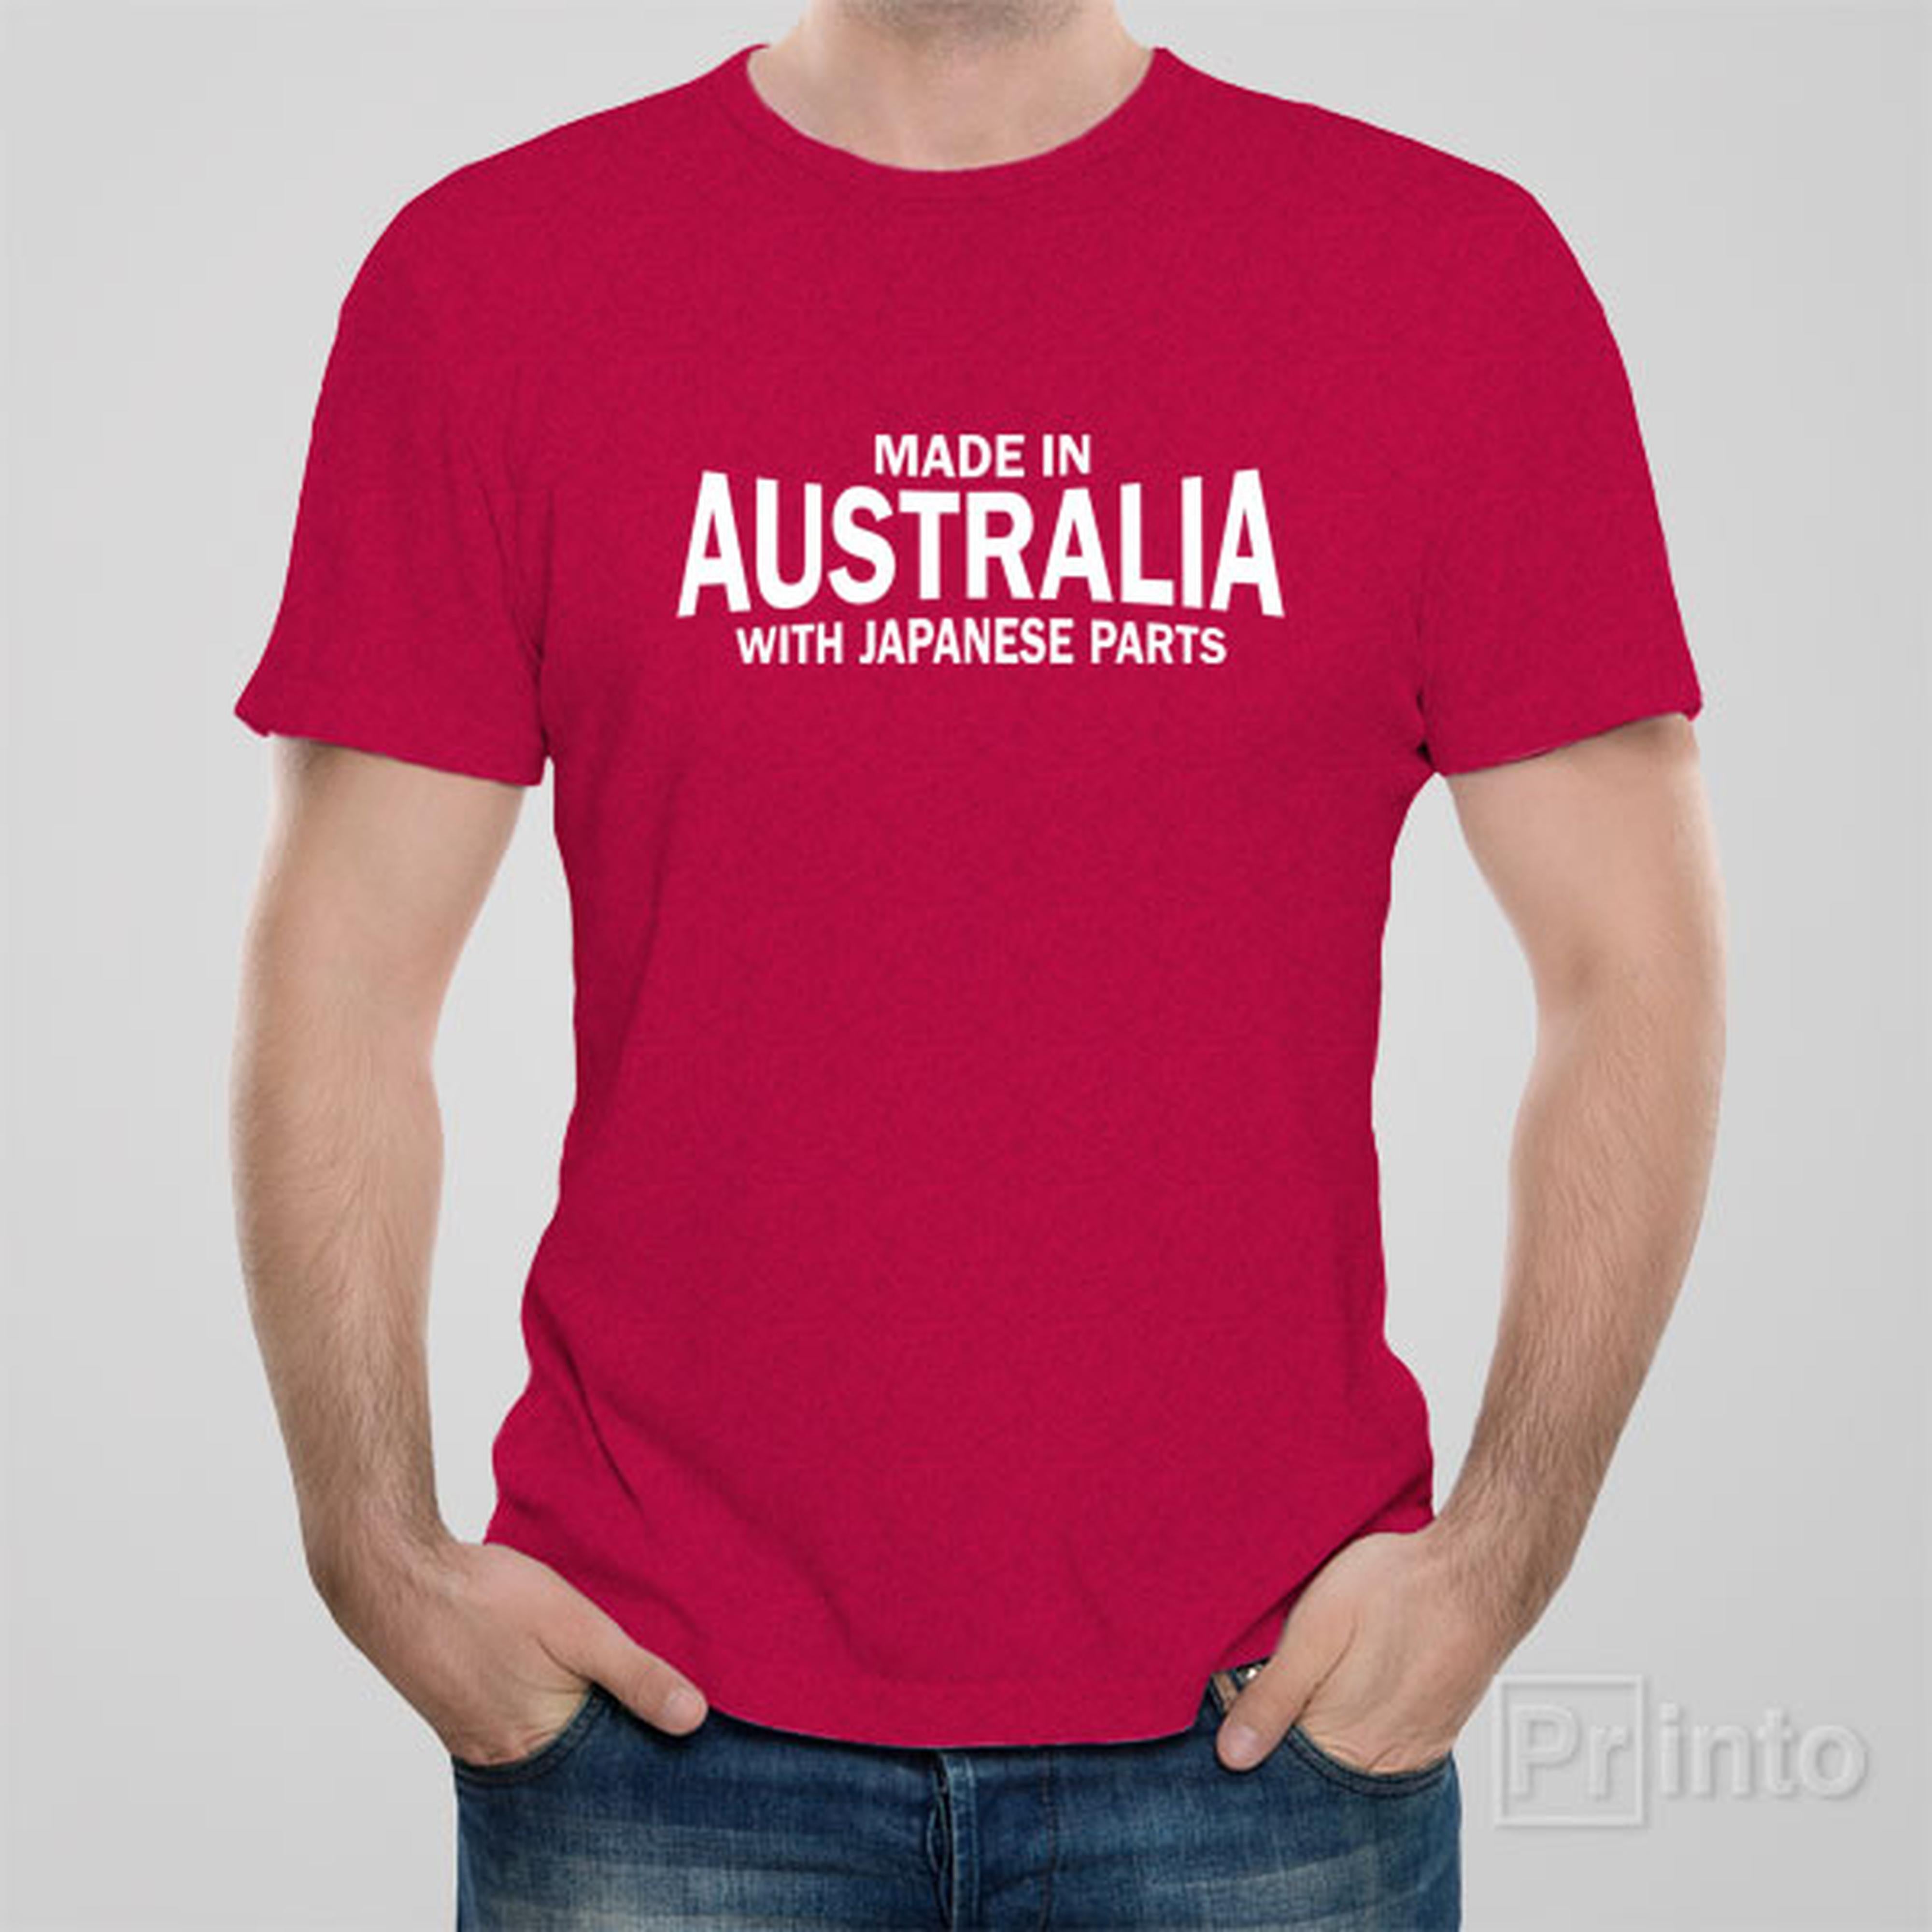 made-in-australia-with-japanese-parts-t-shirt